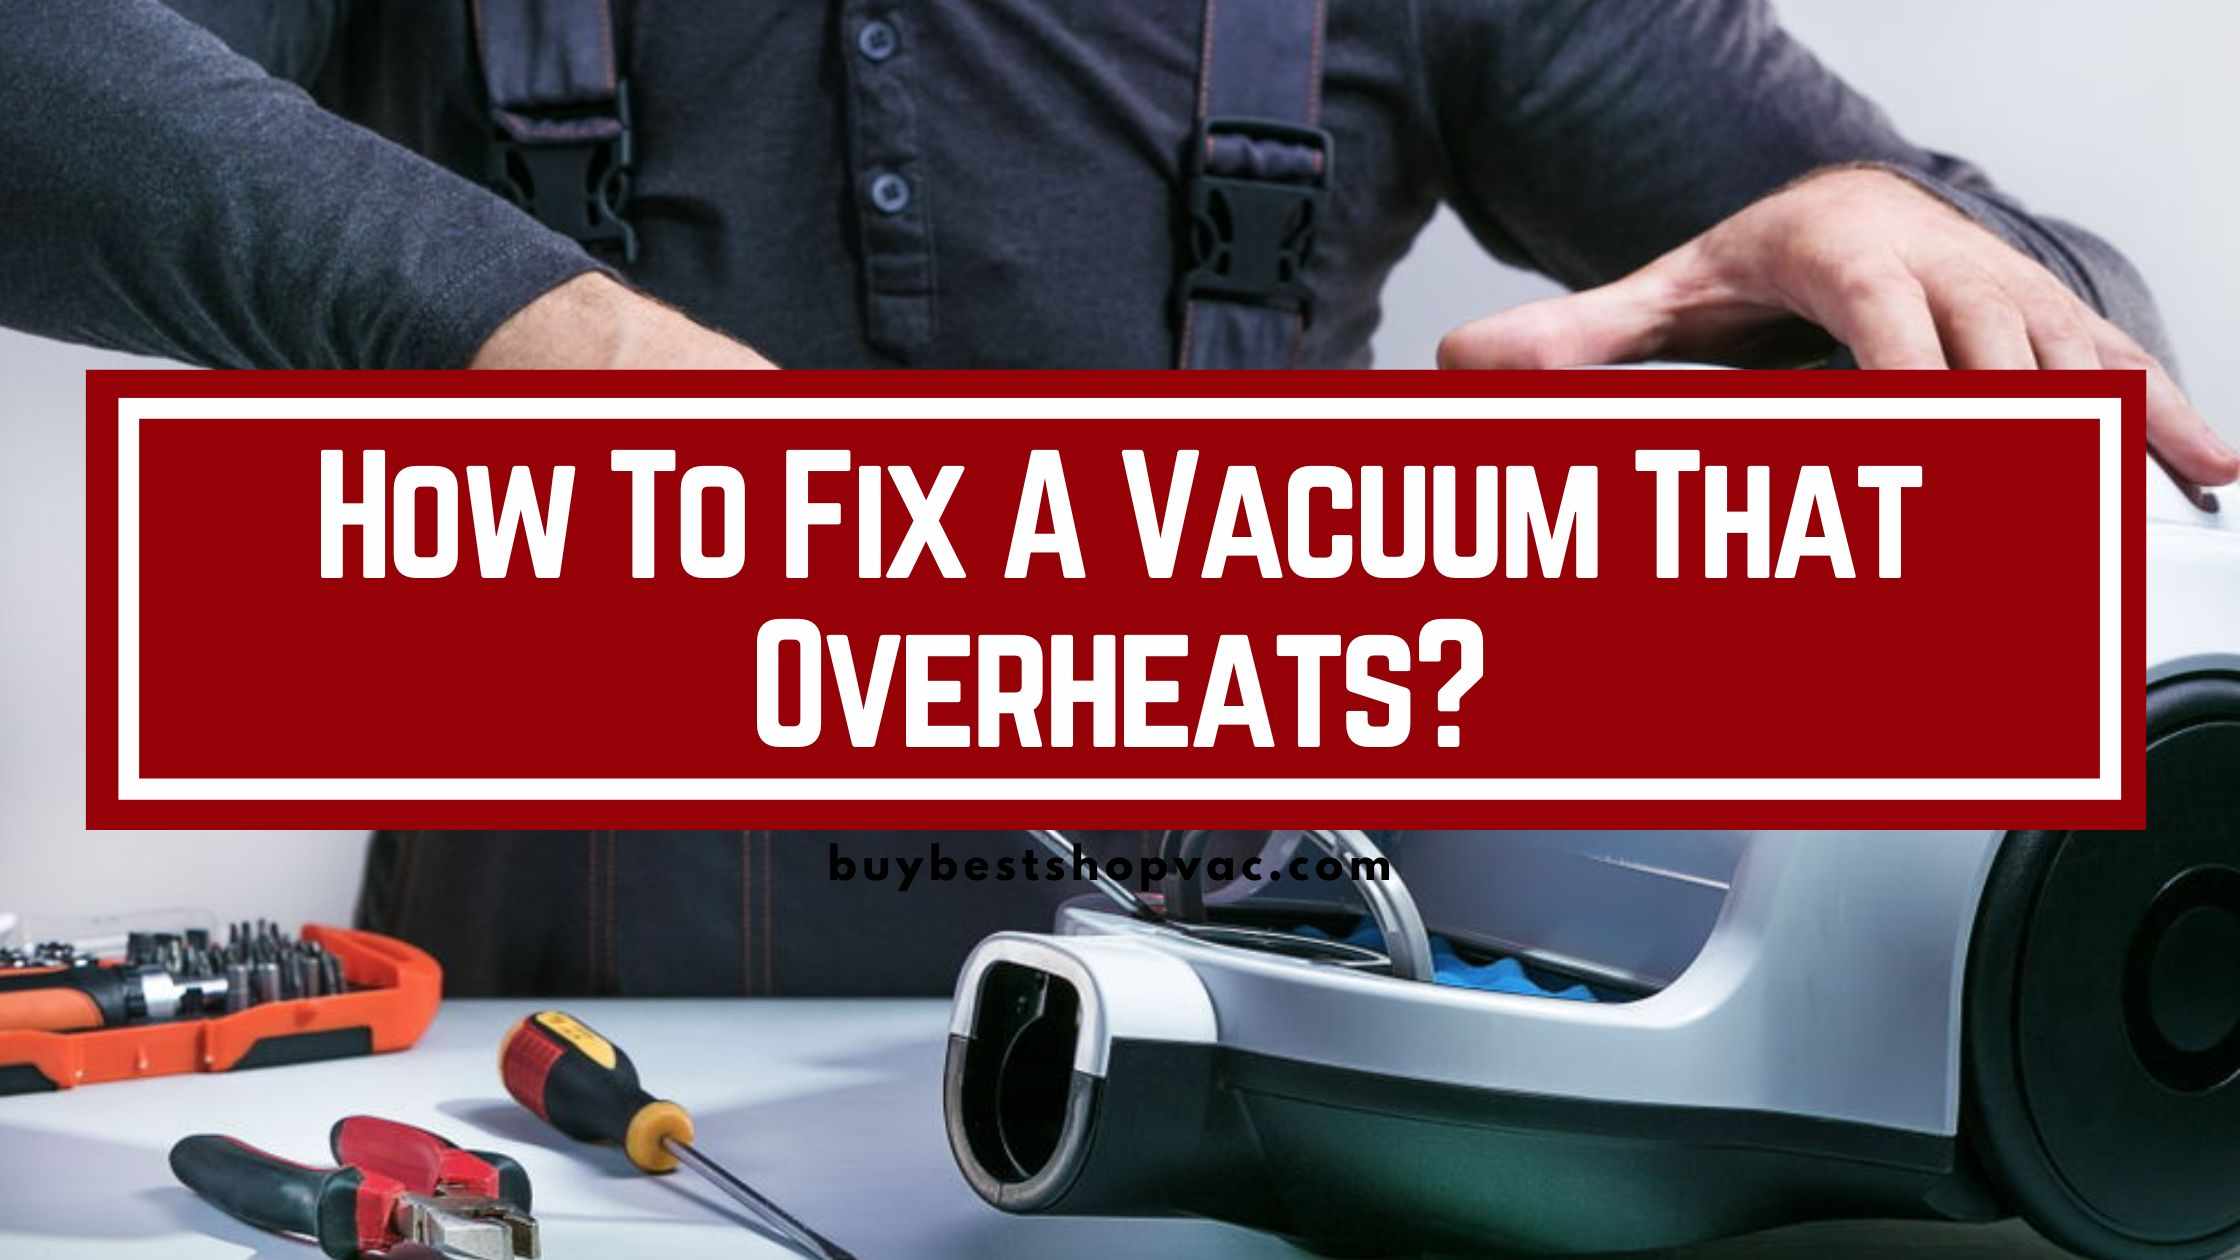 5 Steps How To Fix A Vacuum That Overheats?